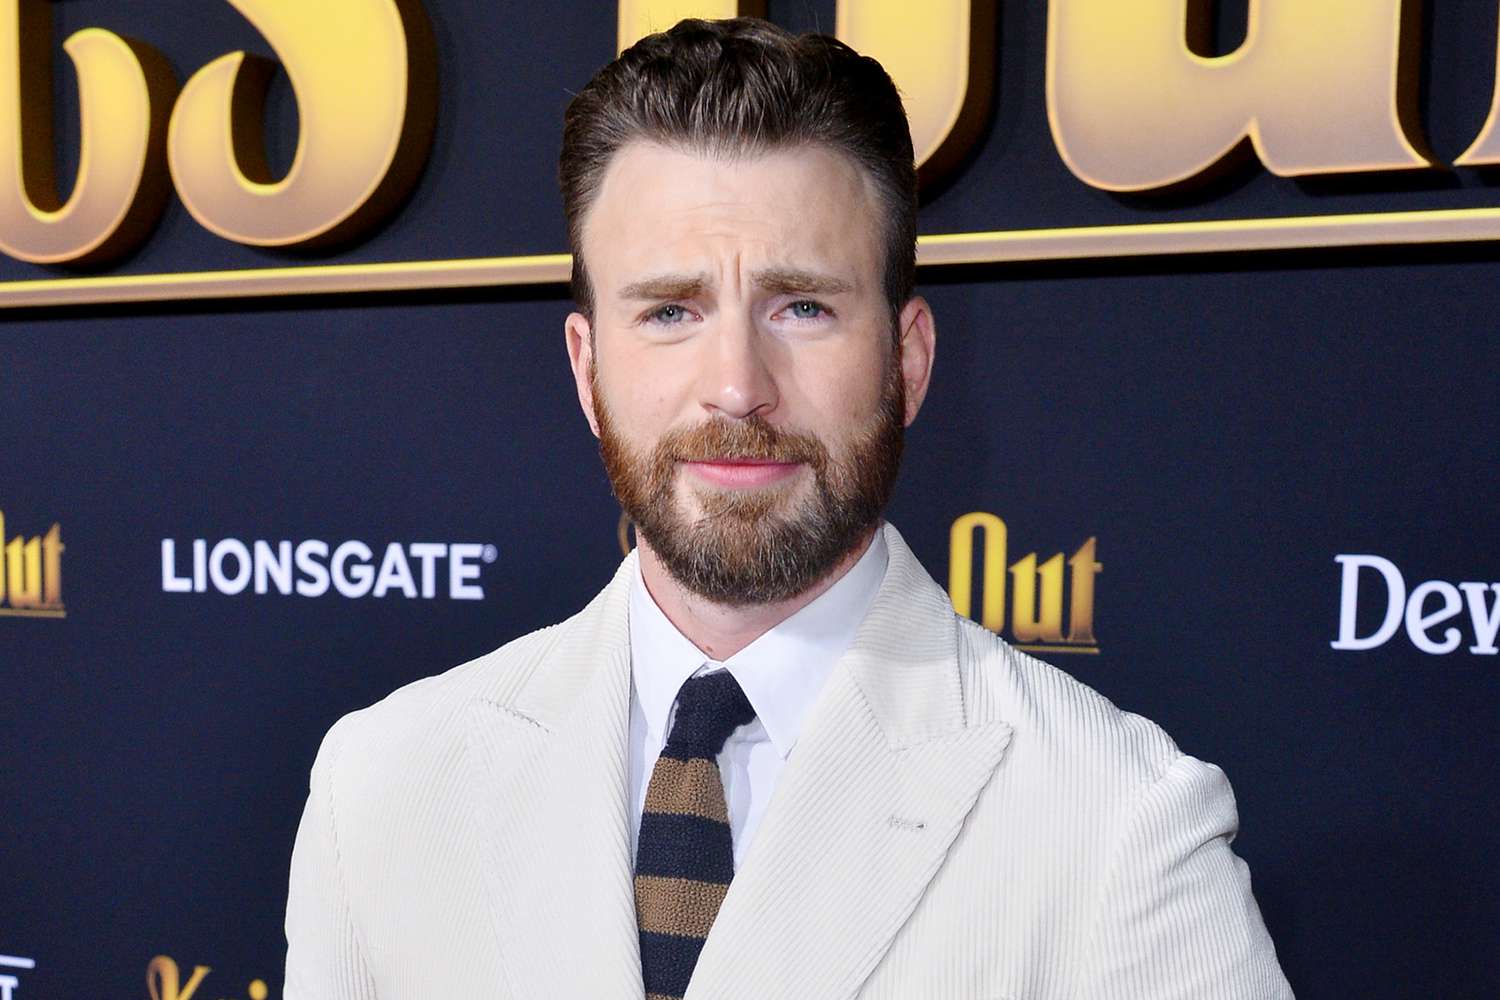 Chris Evans calls his NSFW photo post 'embarrassing' but says 'you gotta roll with the punches'